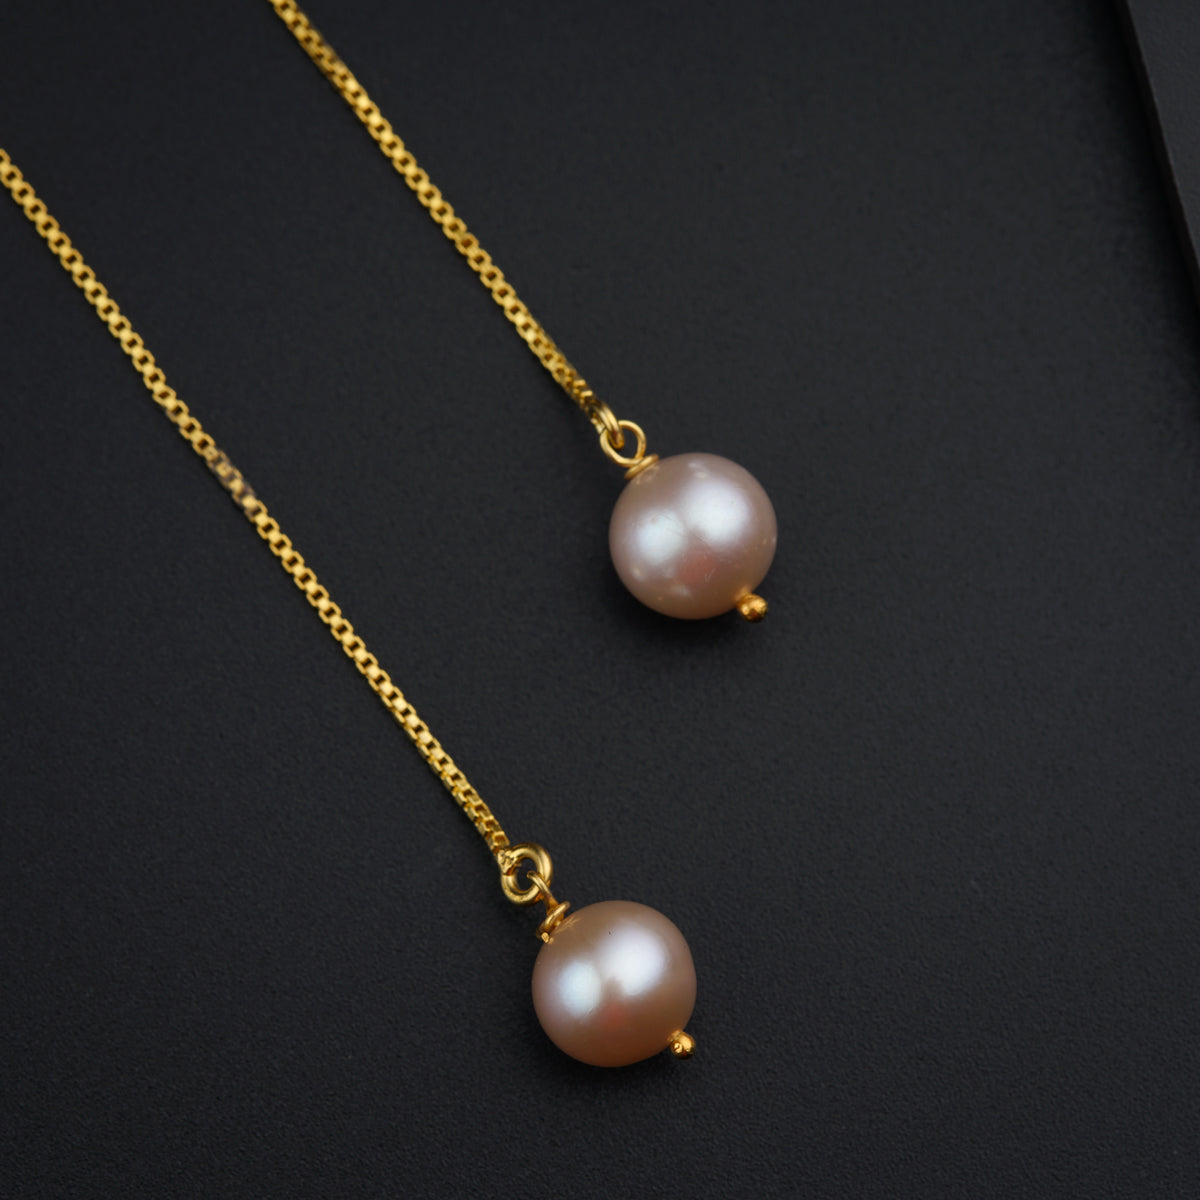 a pair of pearl necklaces on a black surface